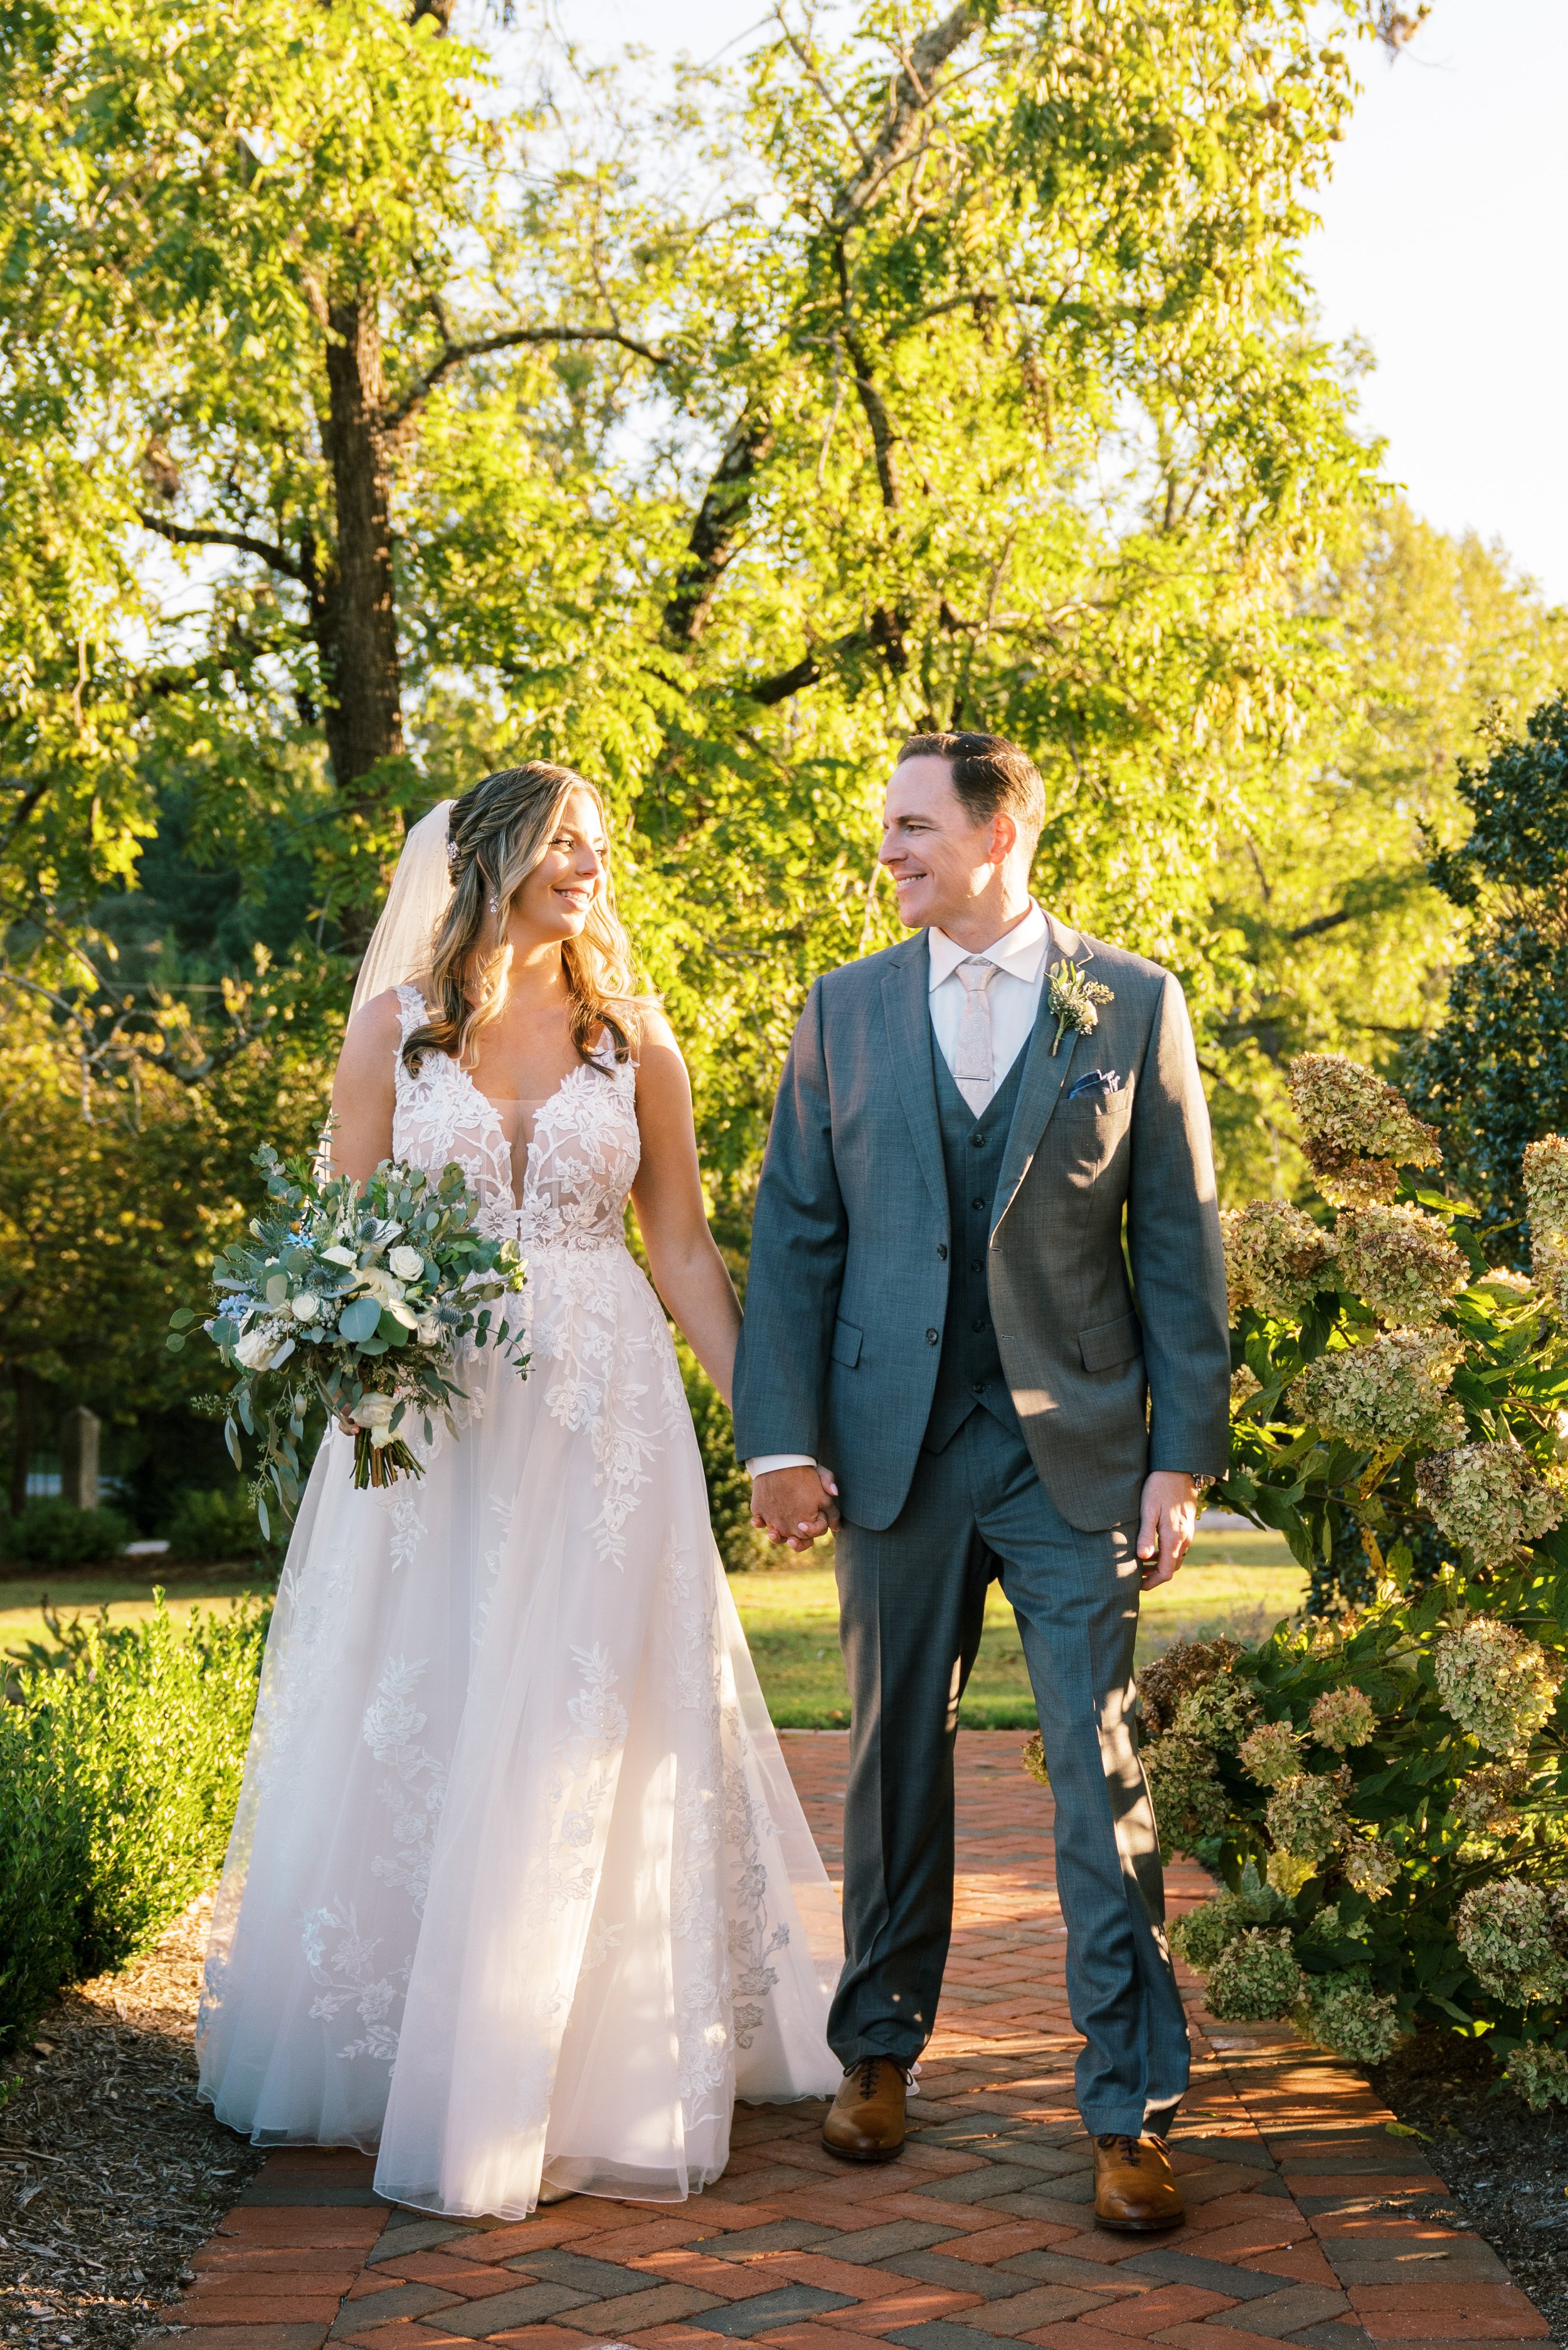  Golden Hour Bride and Groom Teacup Floral Walnut Hill Wedding Venue Fancy This Photography